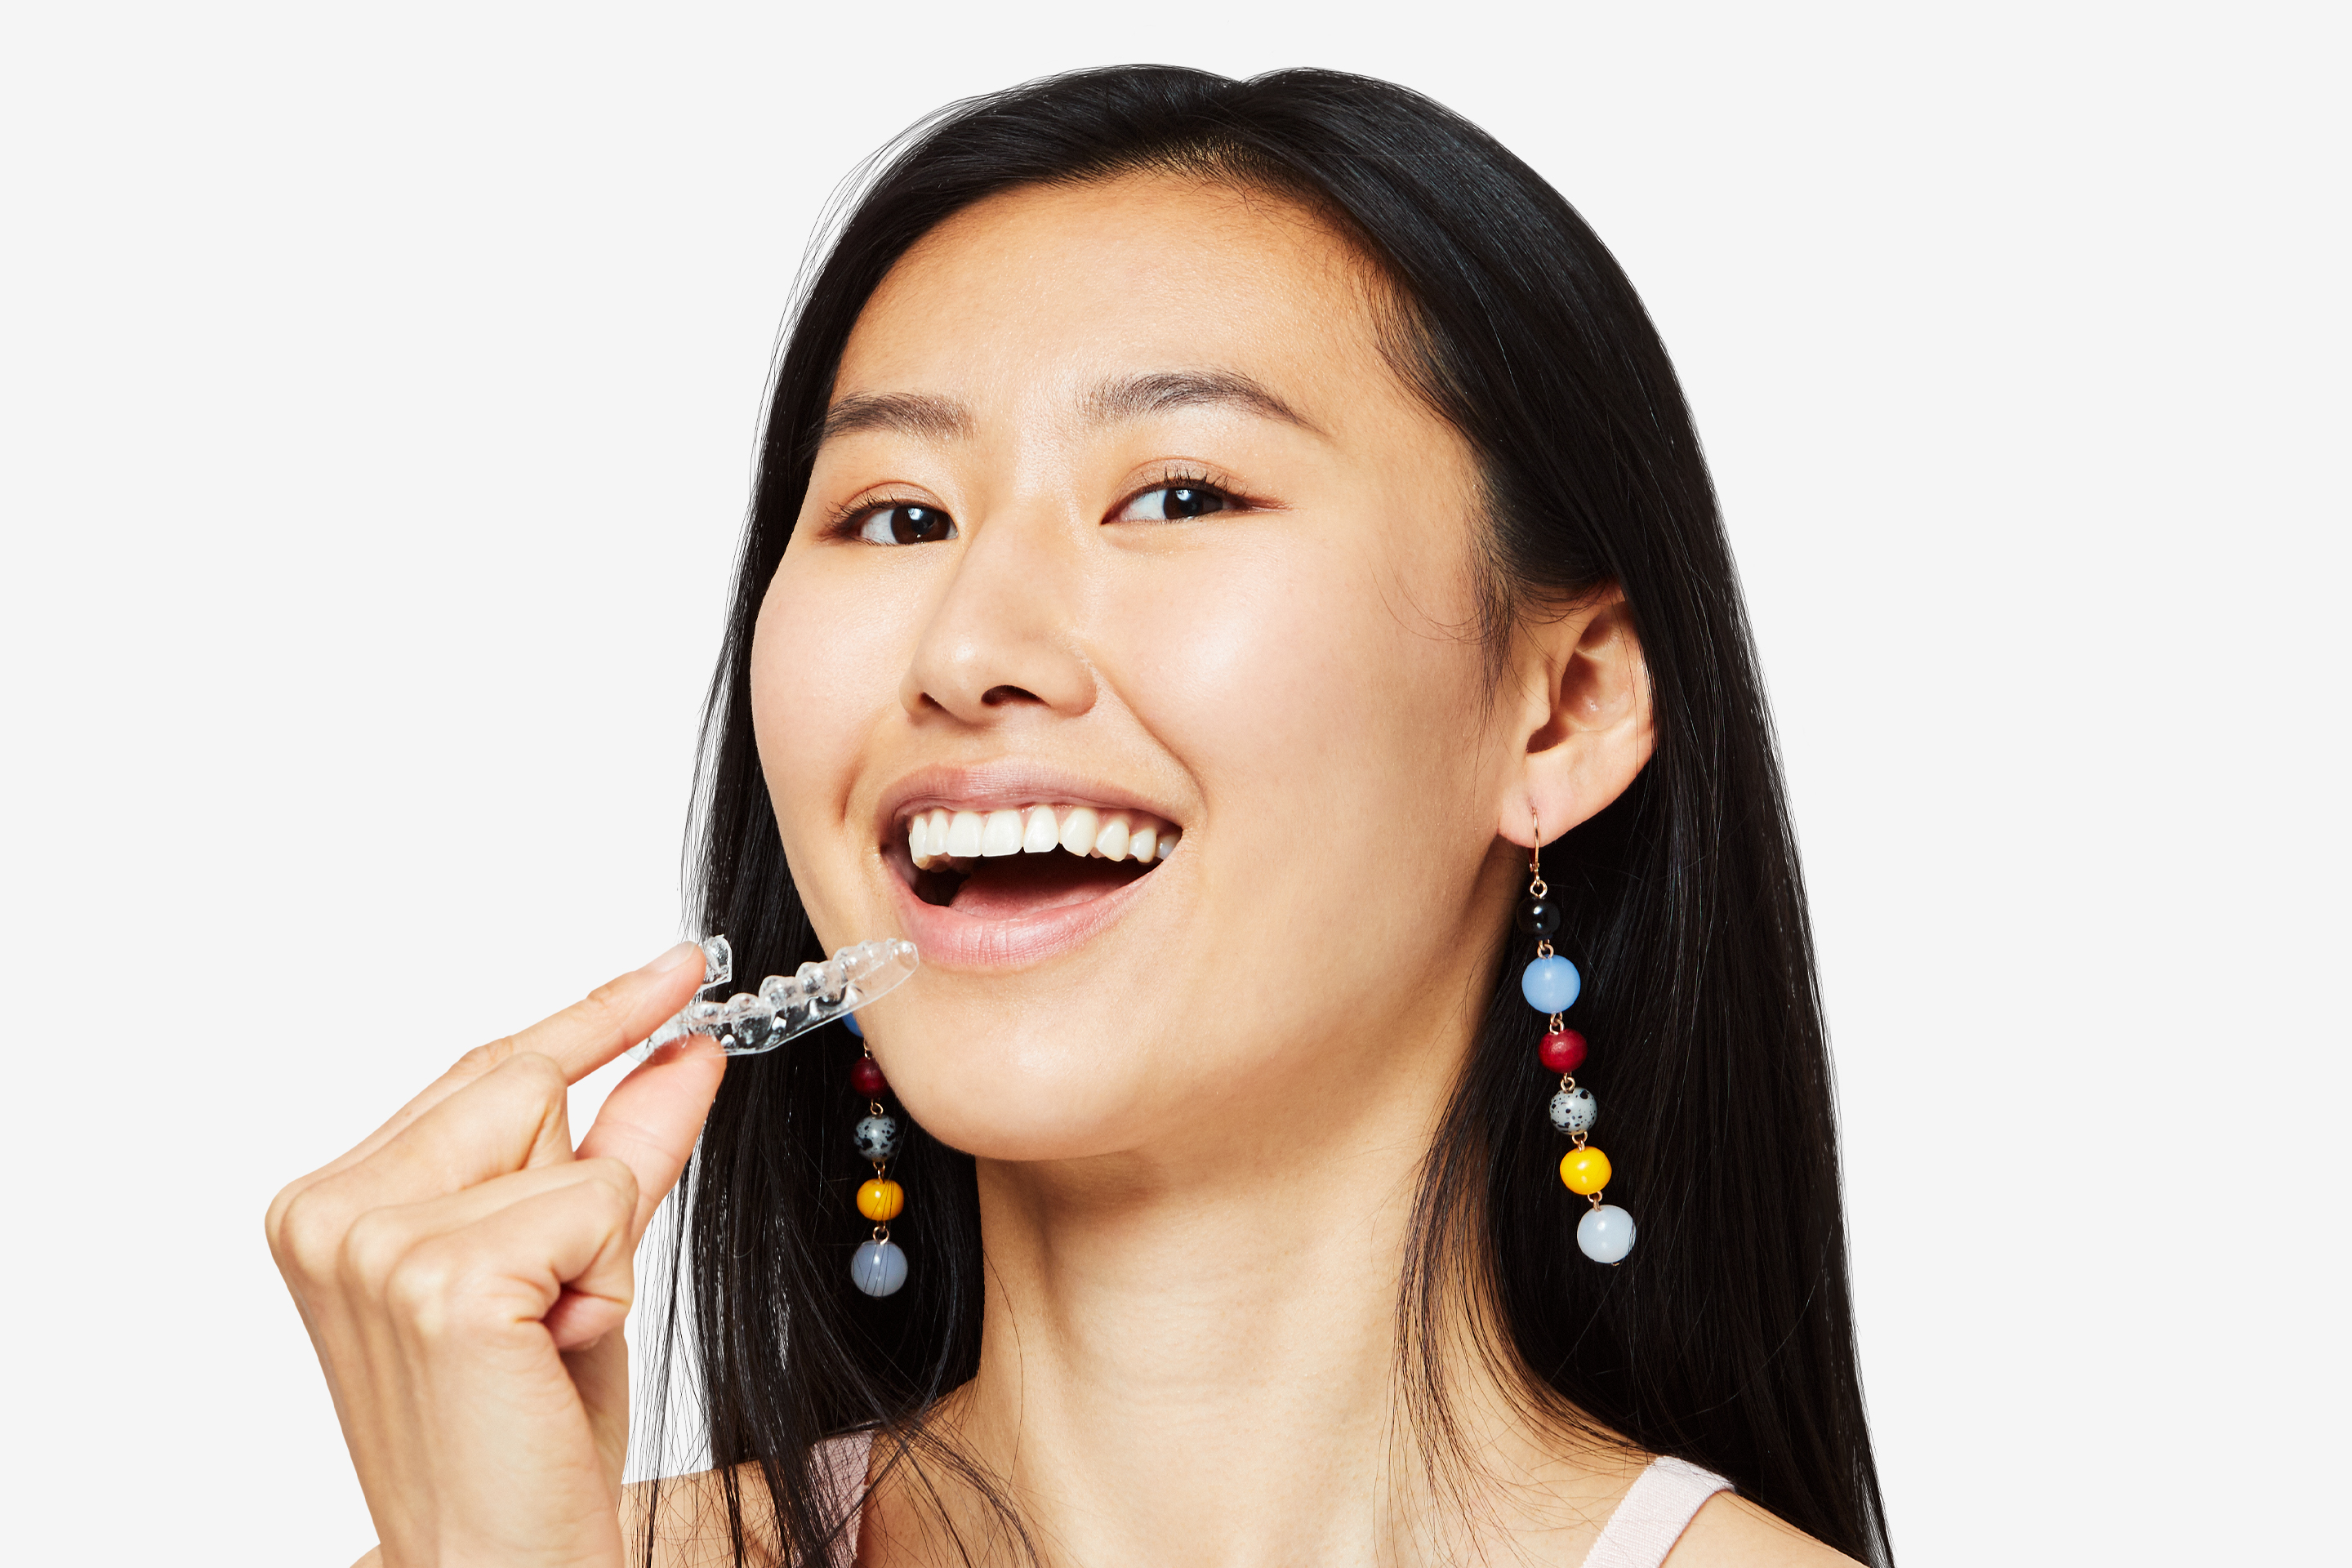 Asian woman smiling with colorful earrings holding a SmileDirectClub clear aligner near her mouth